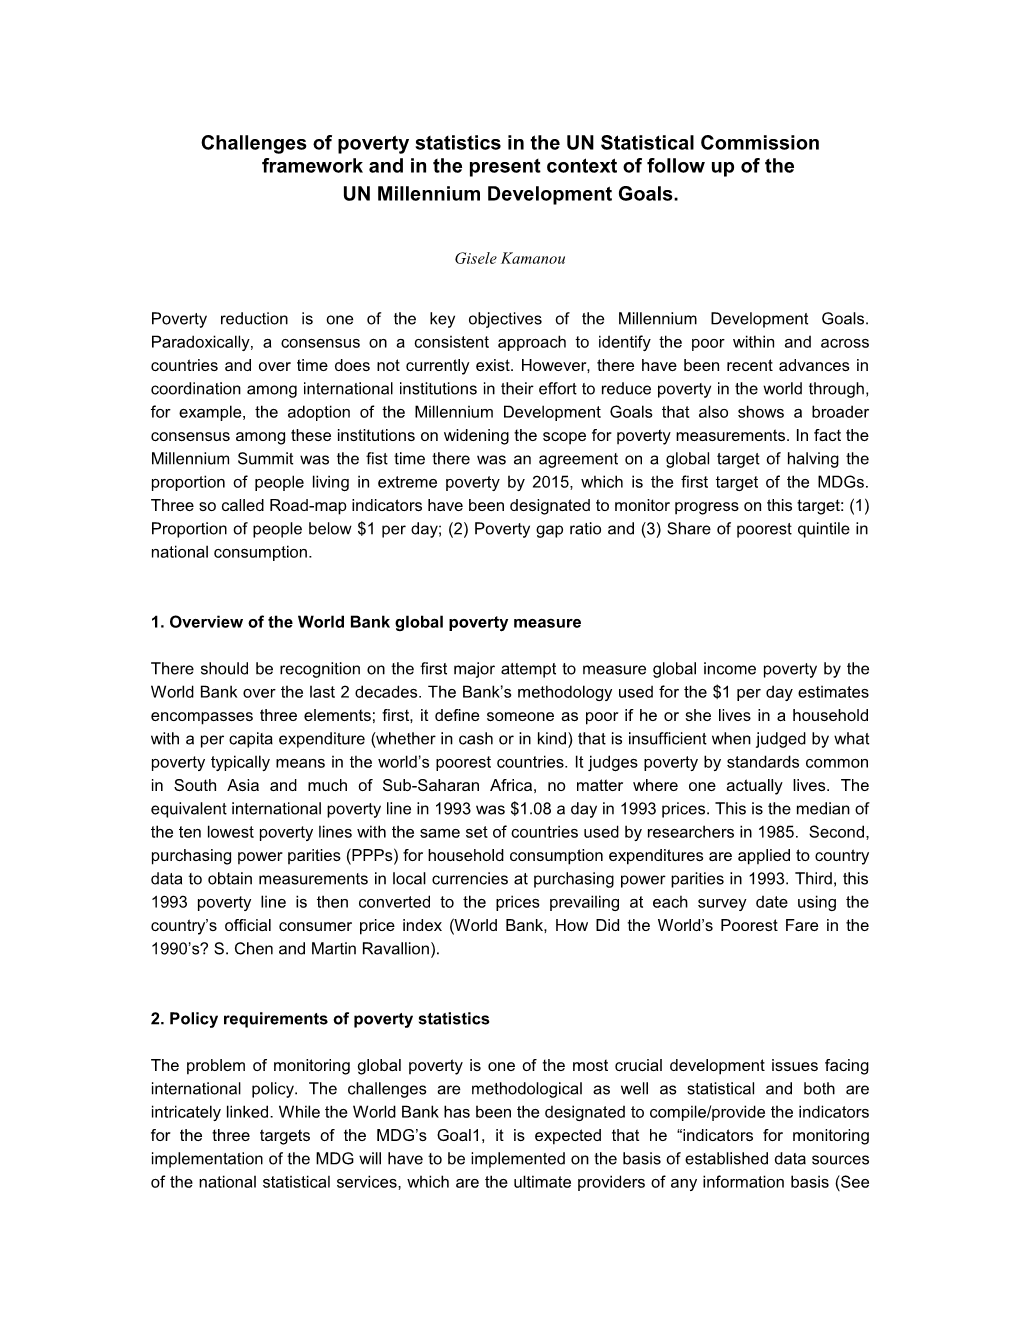 Challenges of Poverty Statistics in the UN Statistical Commission Framework and in The